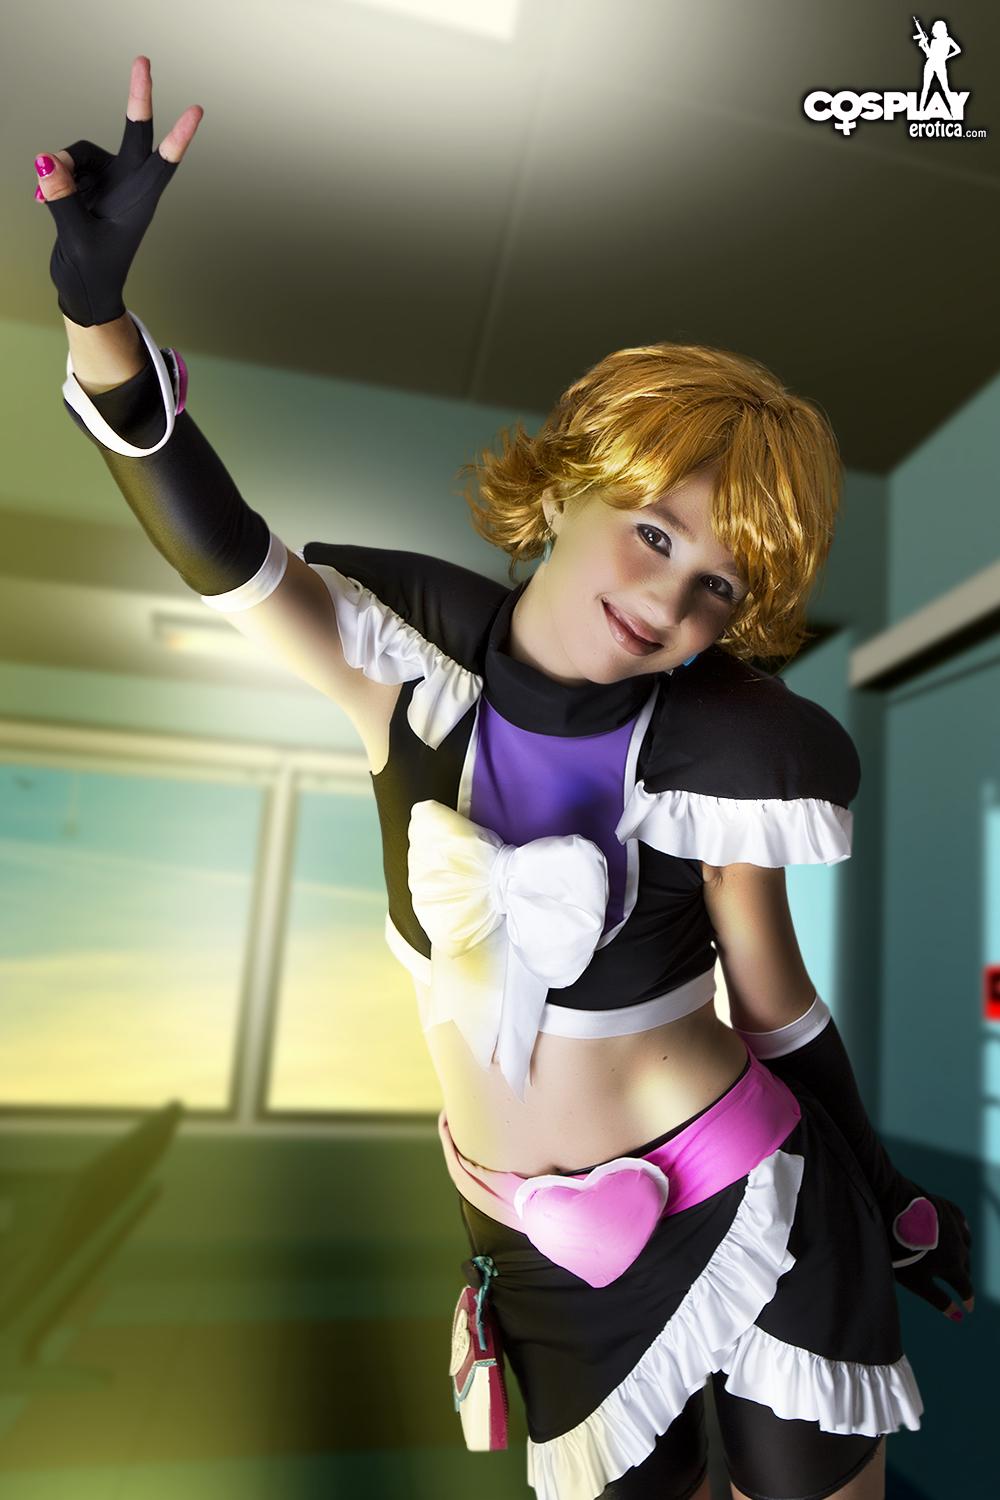 Cosplay hottie stacy strisce in un set anime sexy
 #60007683